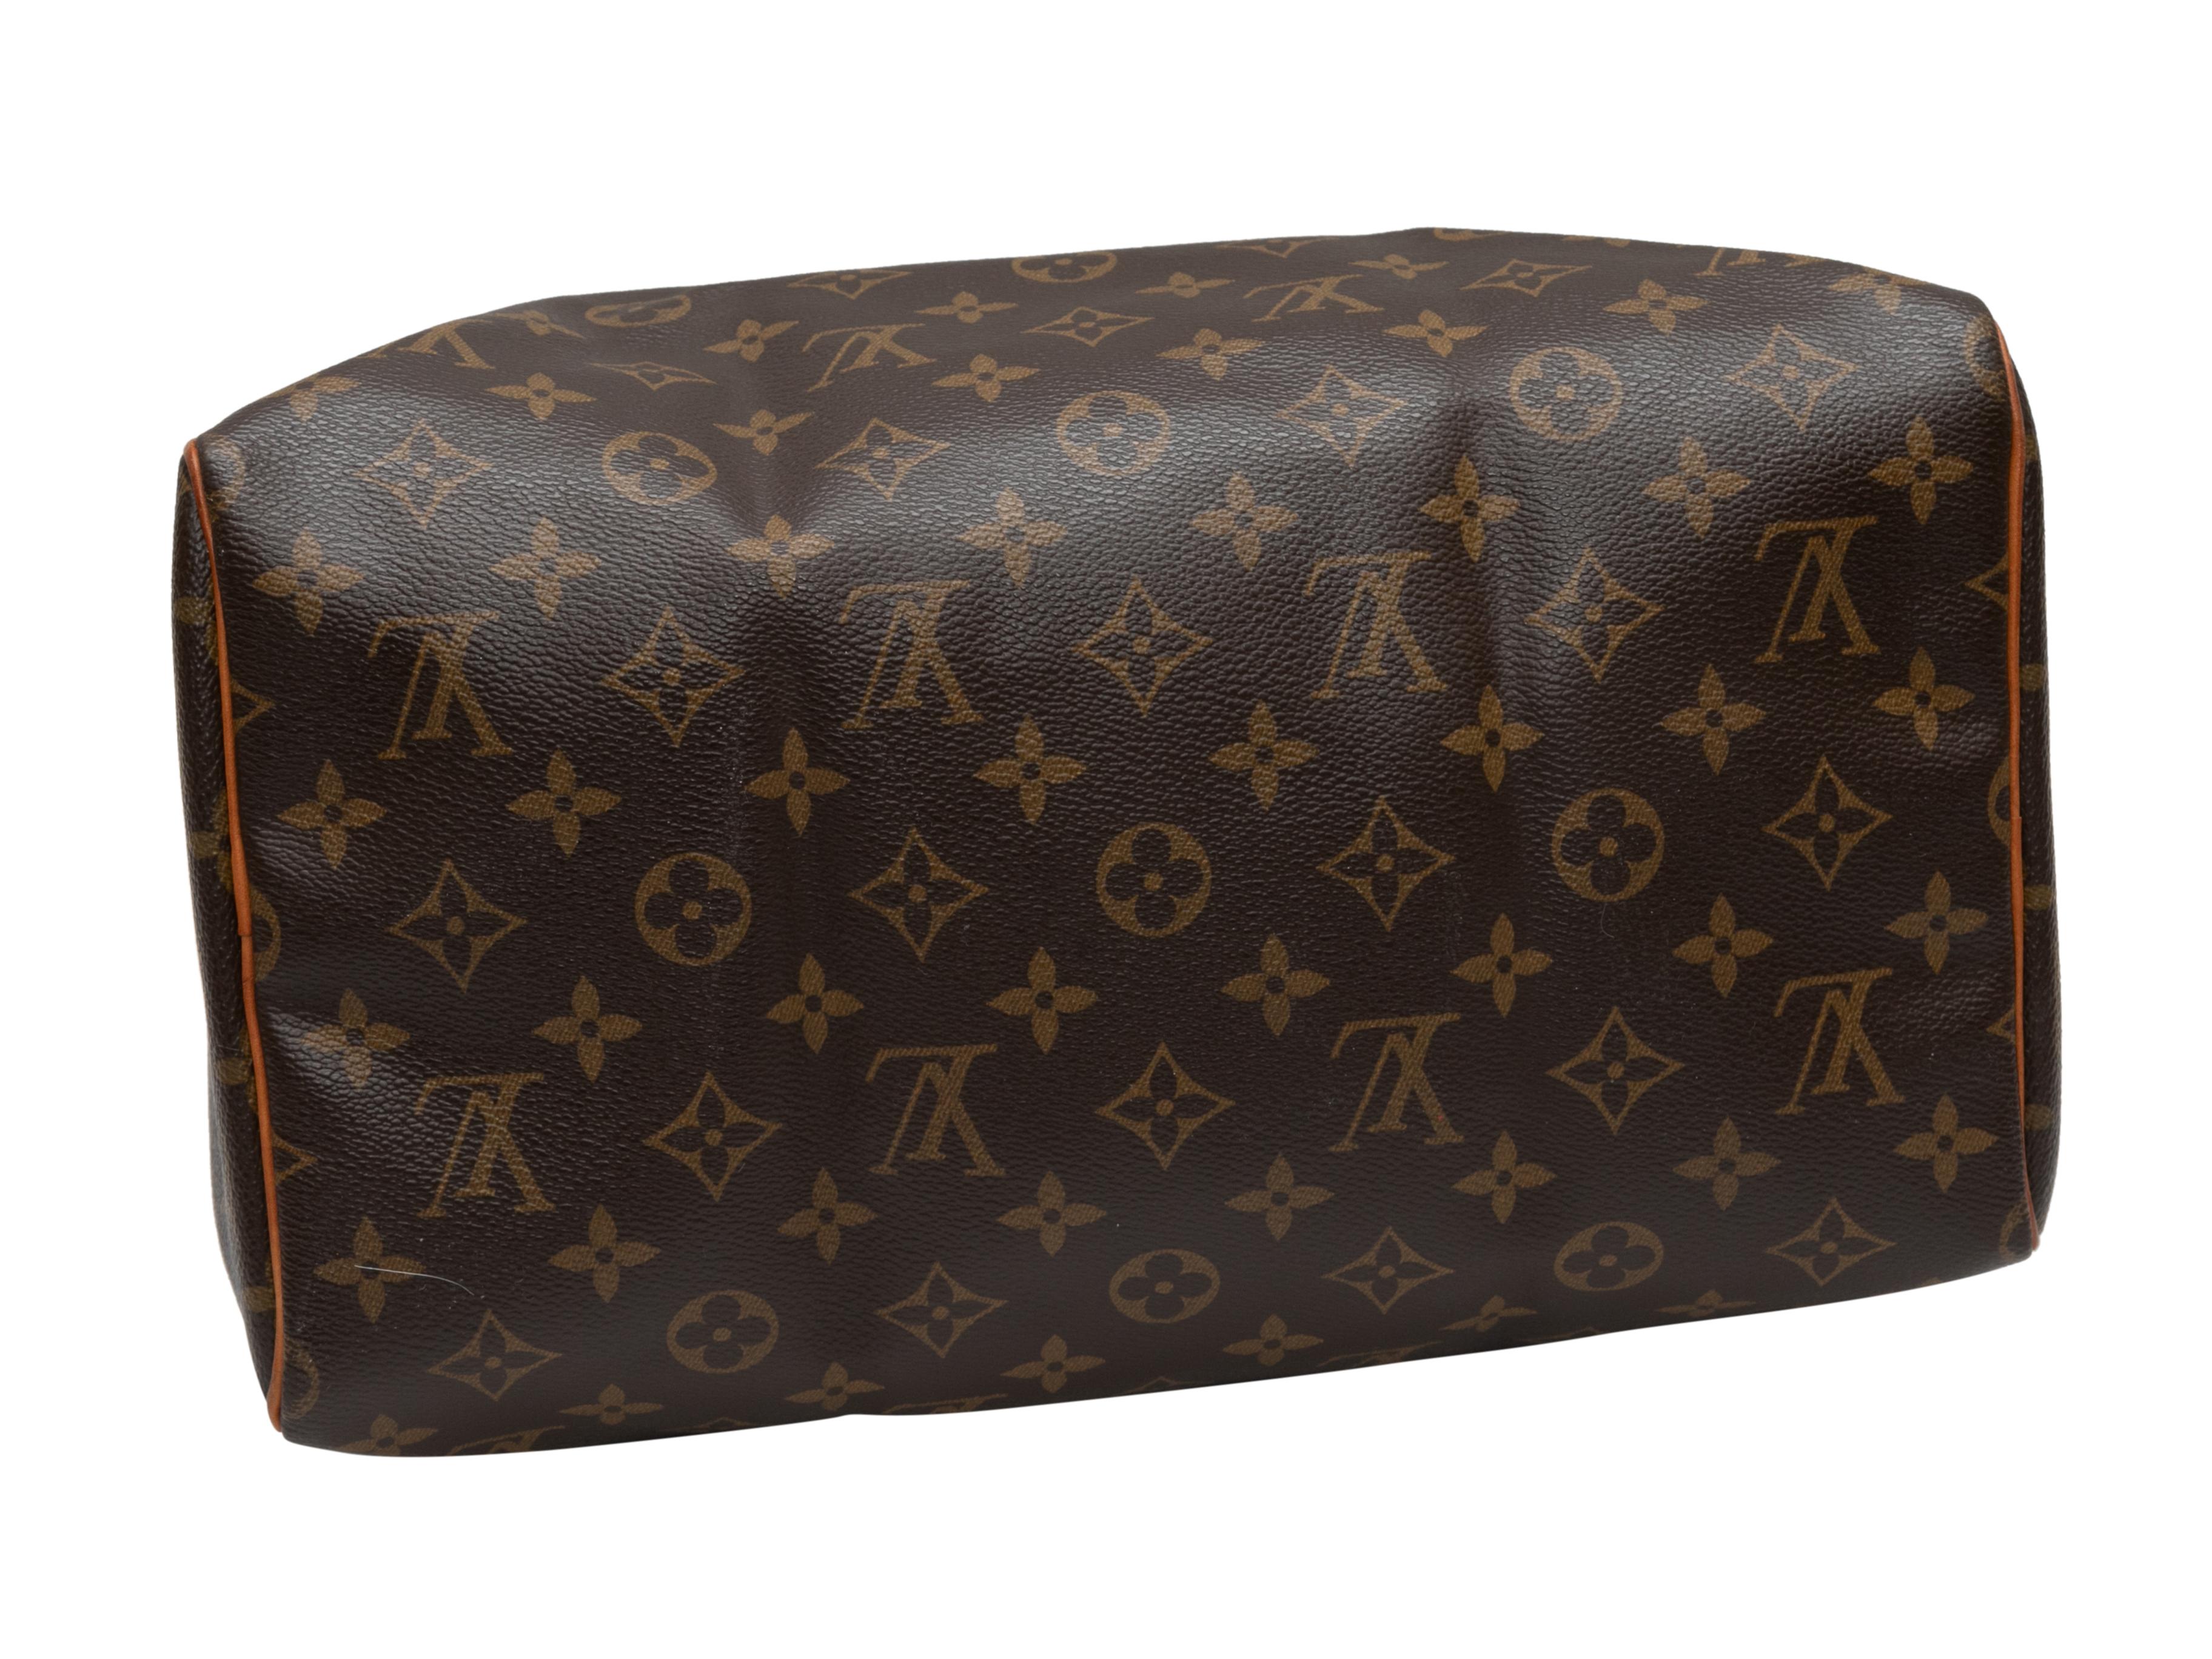 Brown Louis Vuitton Speedy 30 Handbag. The Speedy 30 features a monogram coated canvas body, leather trim, gold-tone hardware, dual rolled top handles, and a top zip closure. 12